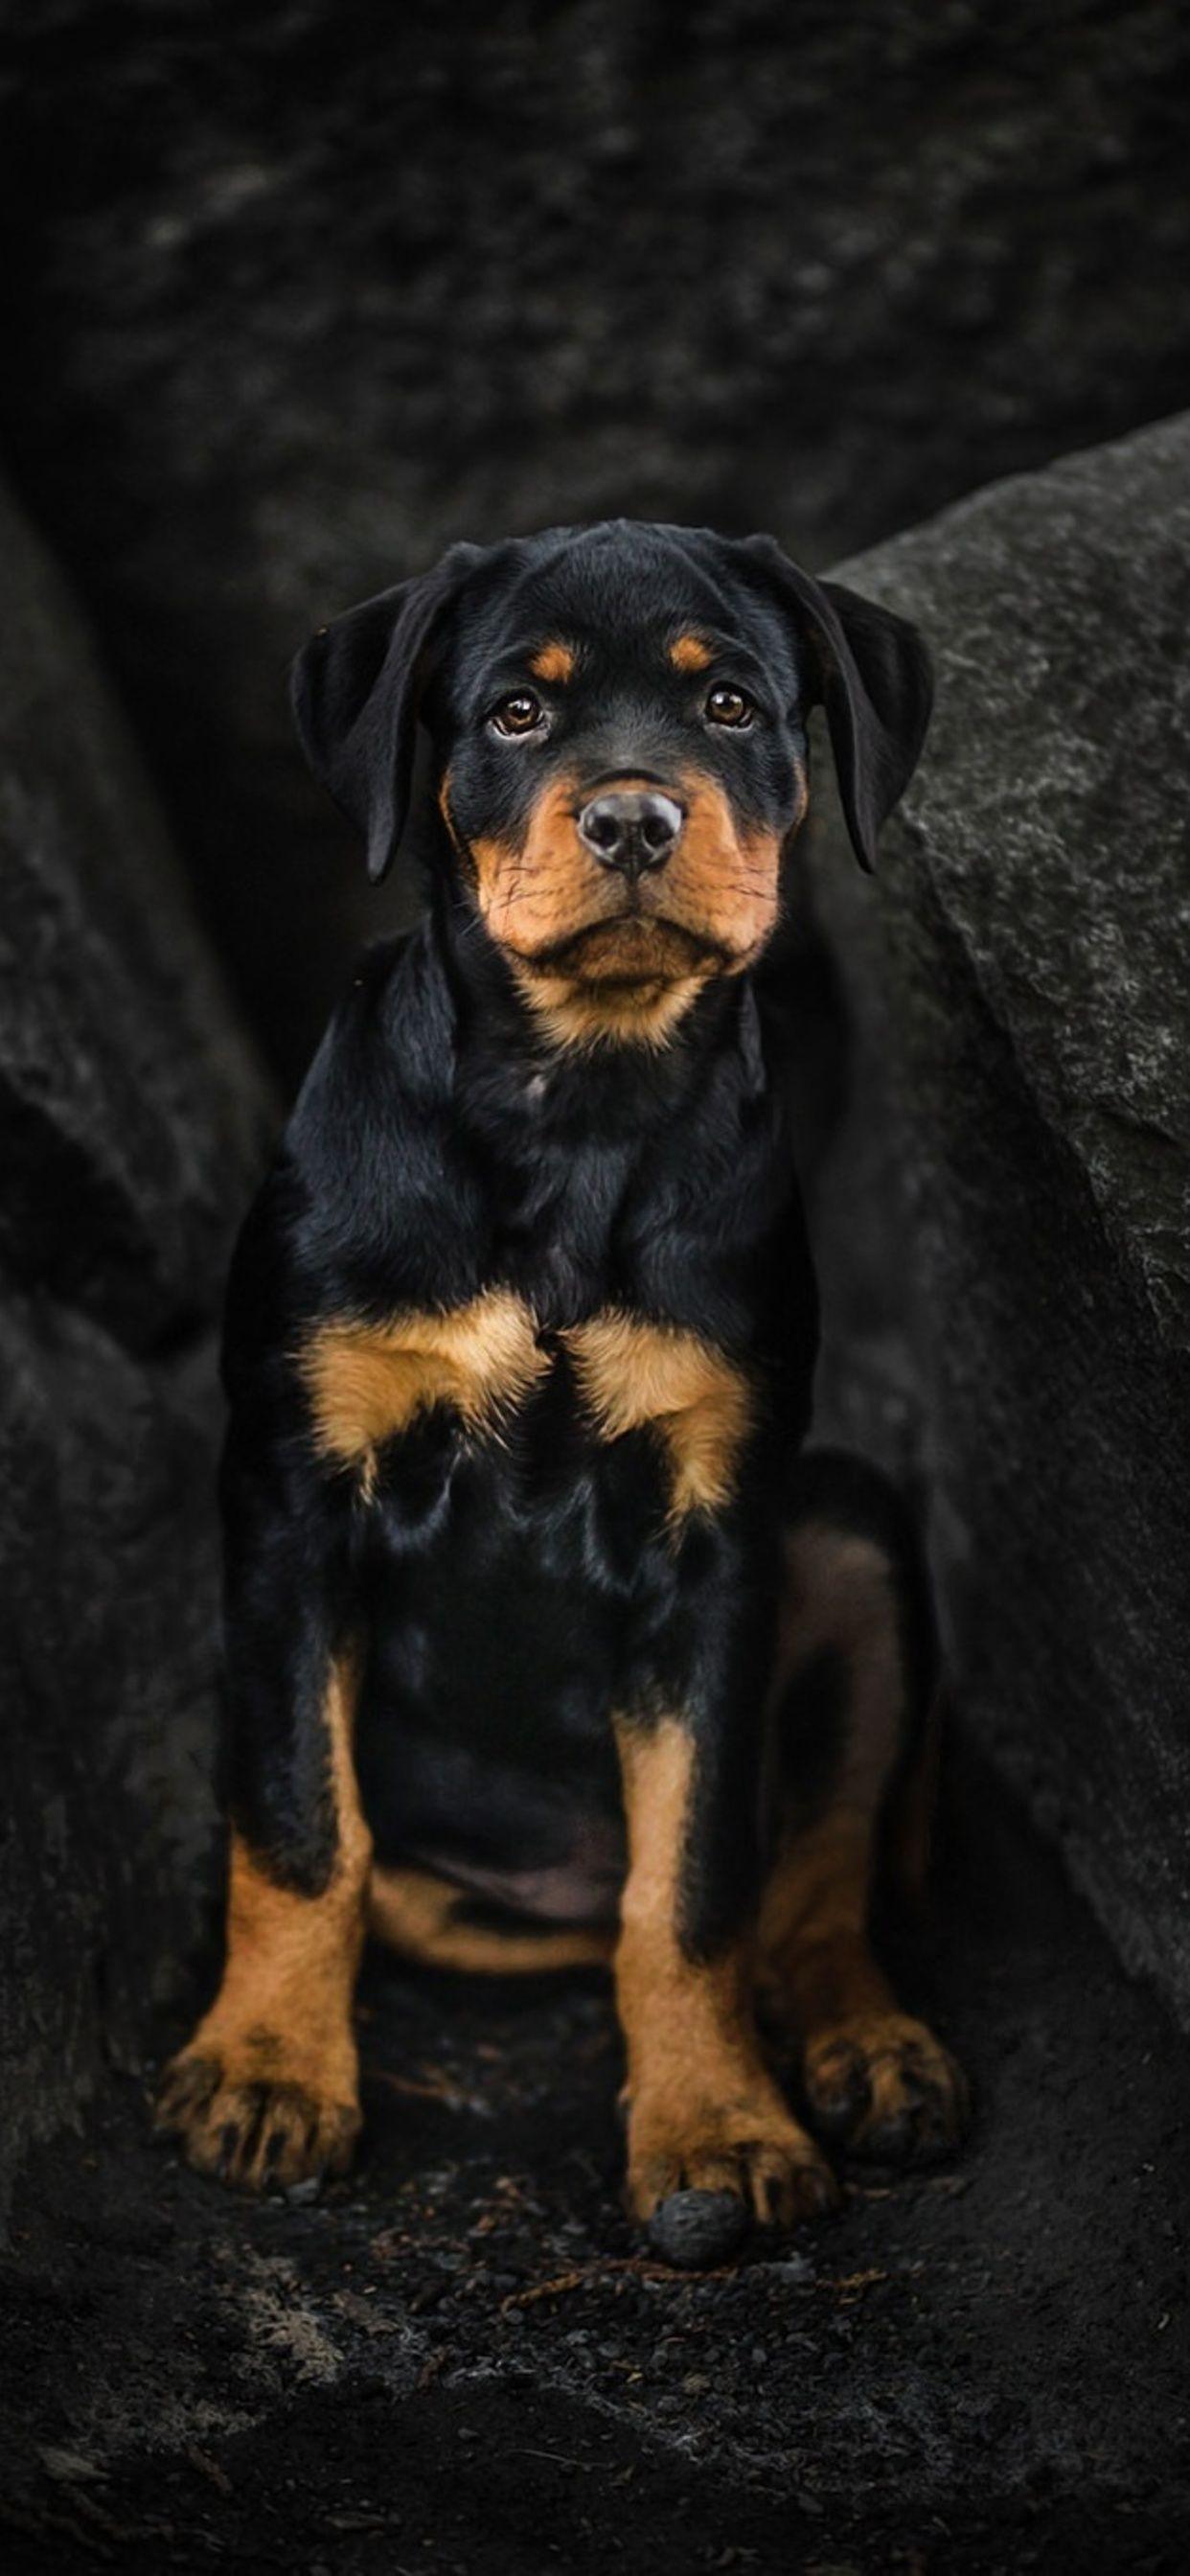 Rottweiler iPhone Wallpapers - Top Free